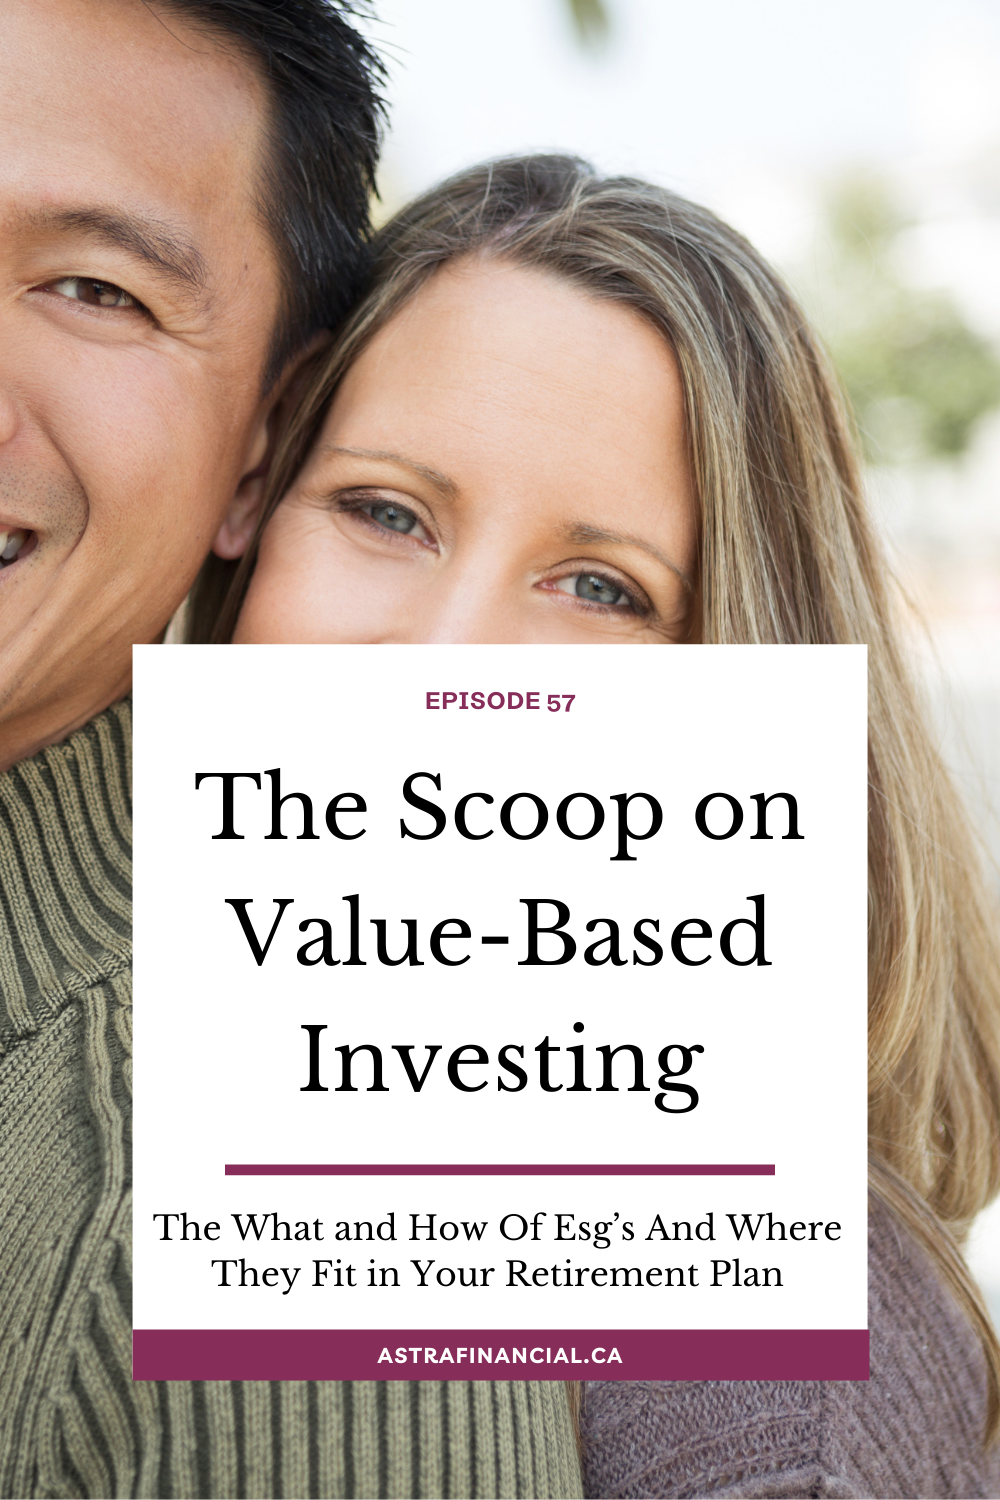 The Scoop on Value-Based Investing by Astra Financial